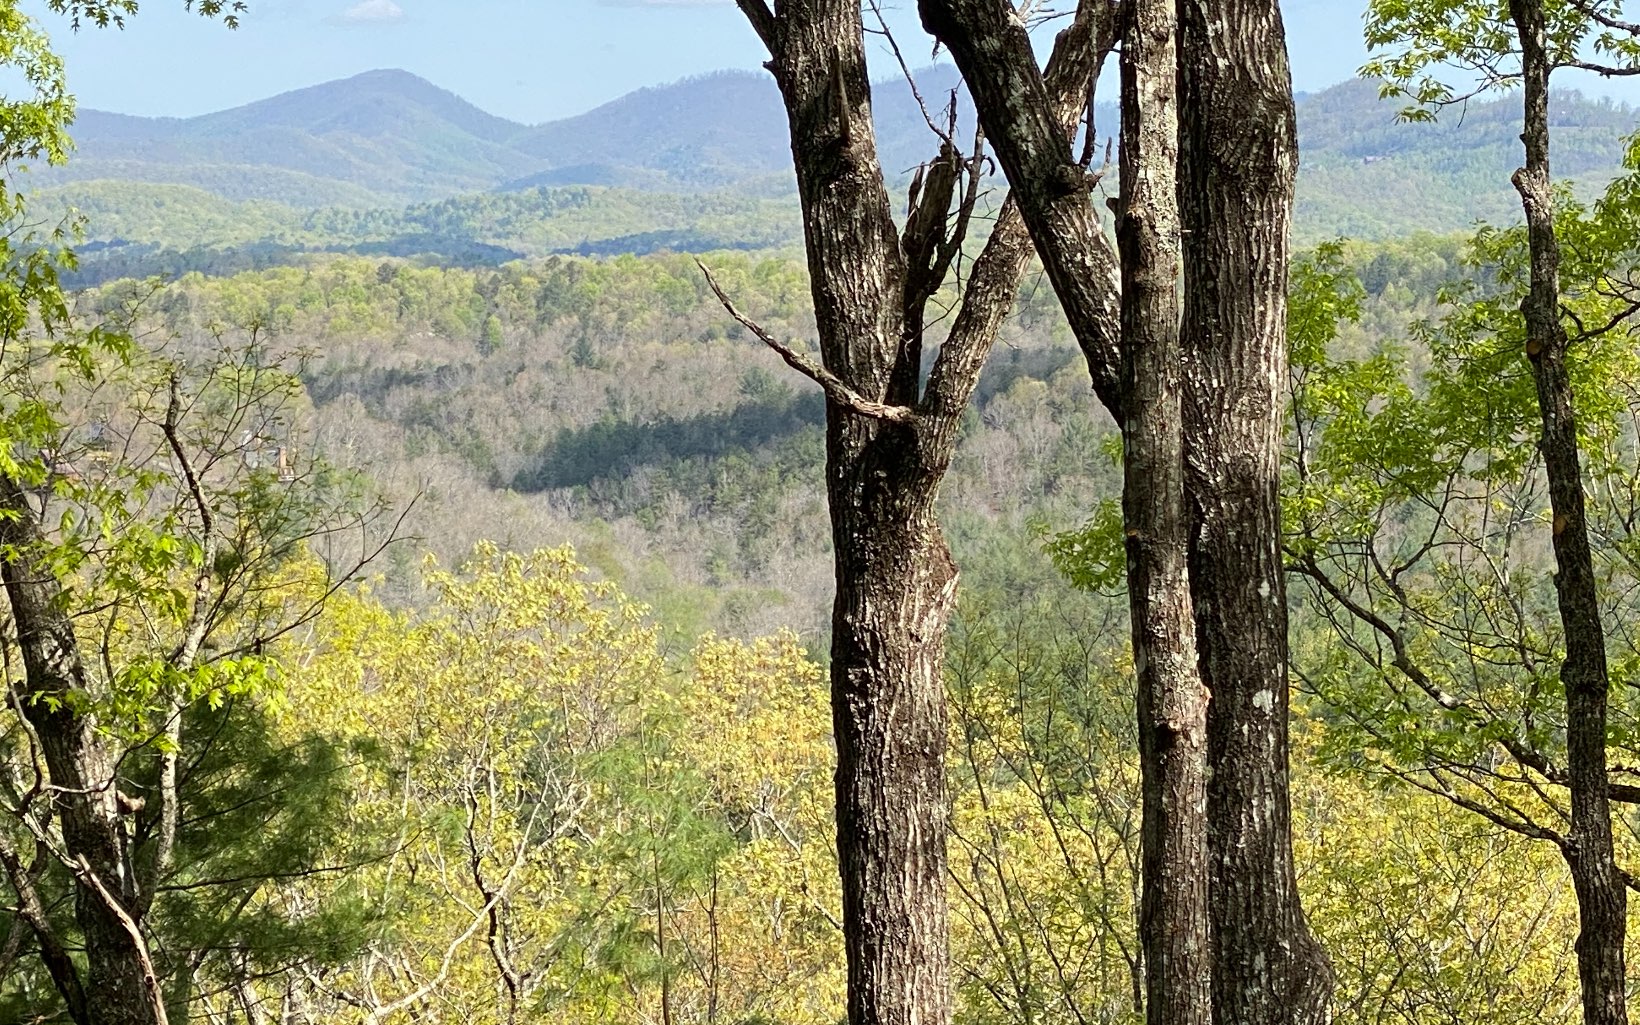 Spectacular year round views from this 2 acre lot! Welcome to Raven Ridge. This mountain community is nestled in the heart of the Appalachian Mountains w/ easy access to Blue Ridge, Blairsville and Murphy. Upscale cabins already built in this growing development. Underground utilities & community water available.